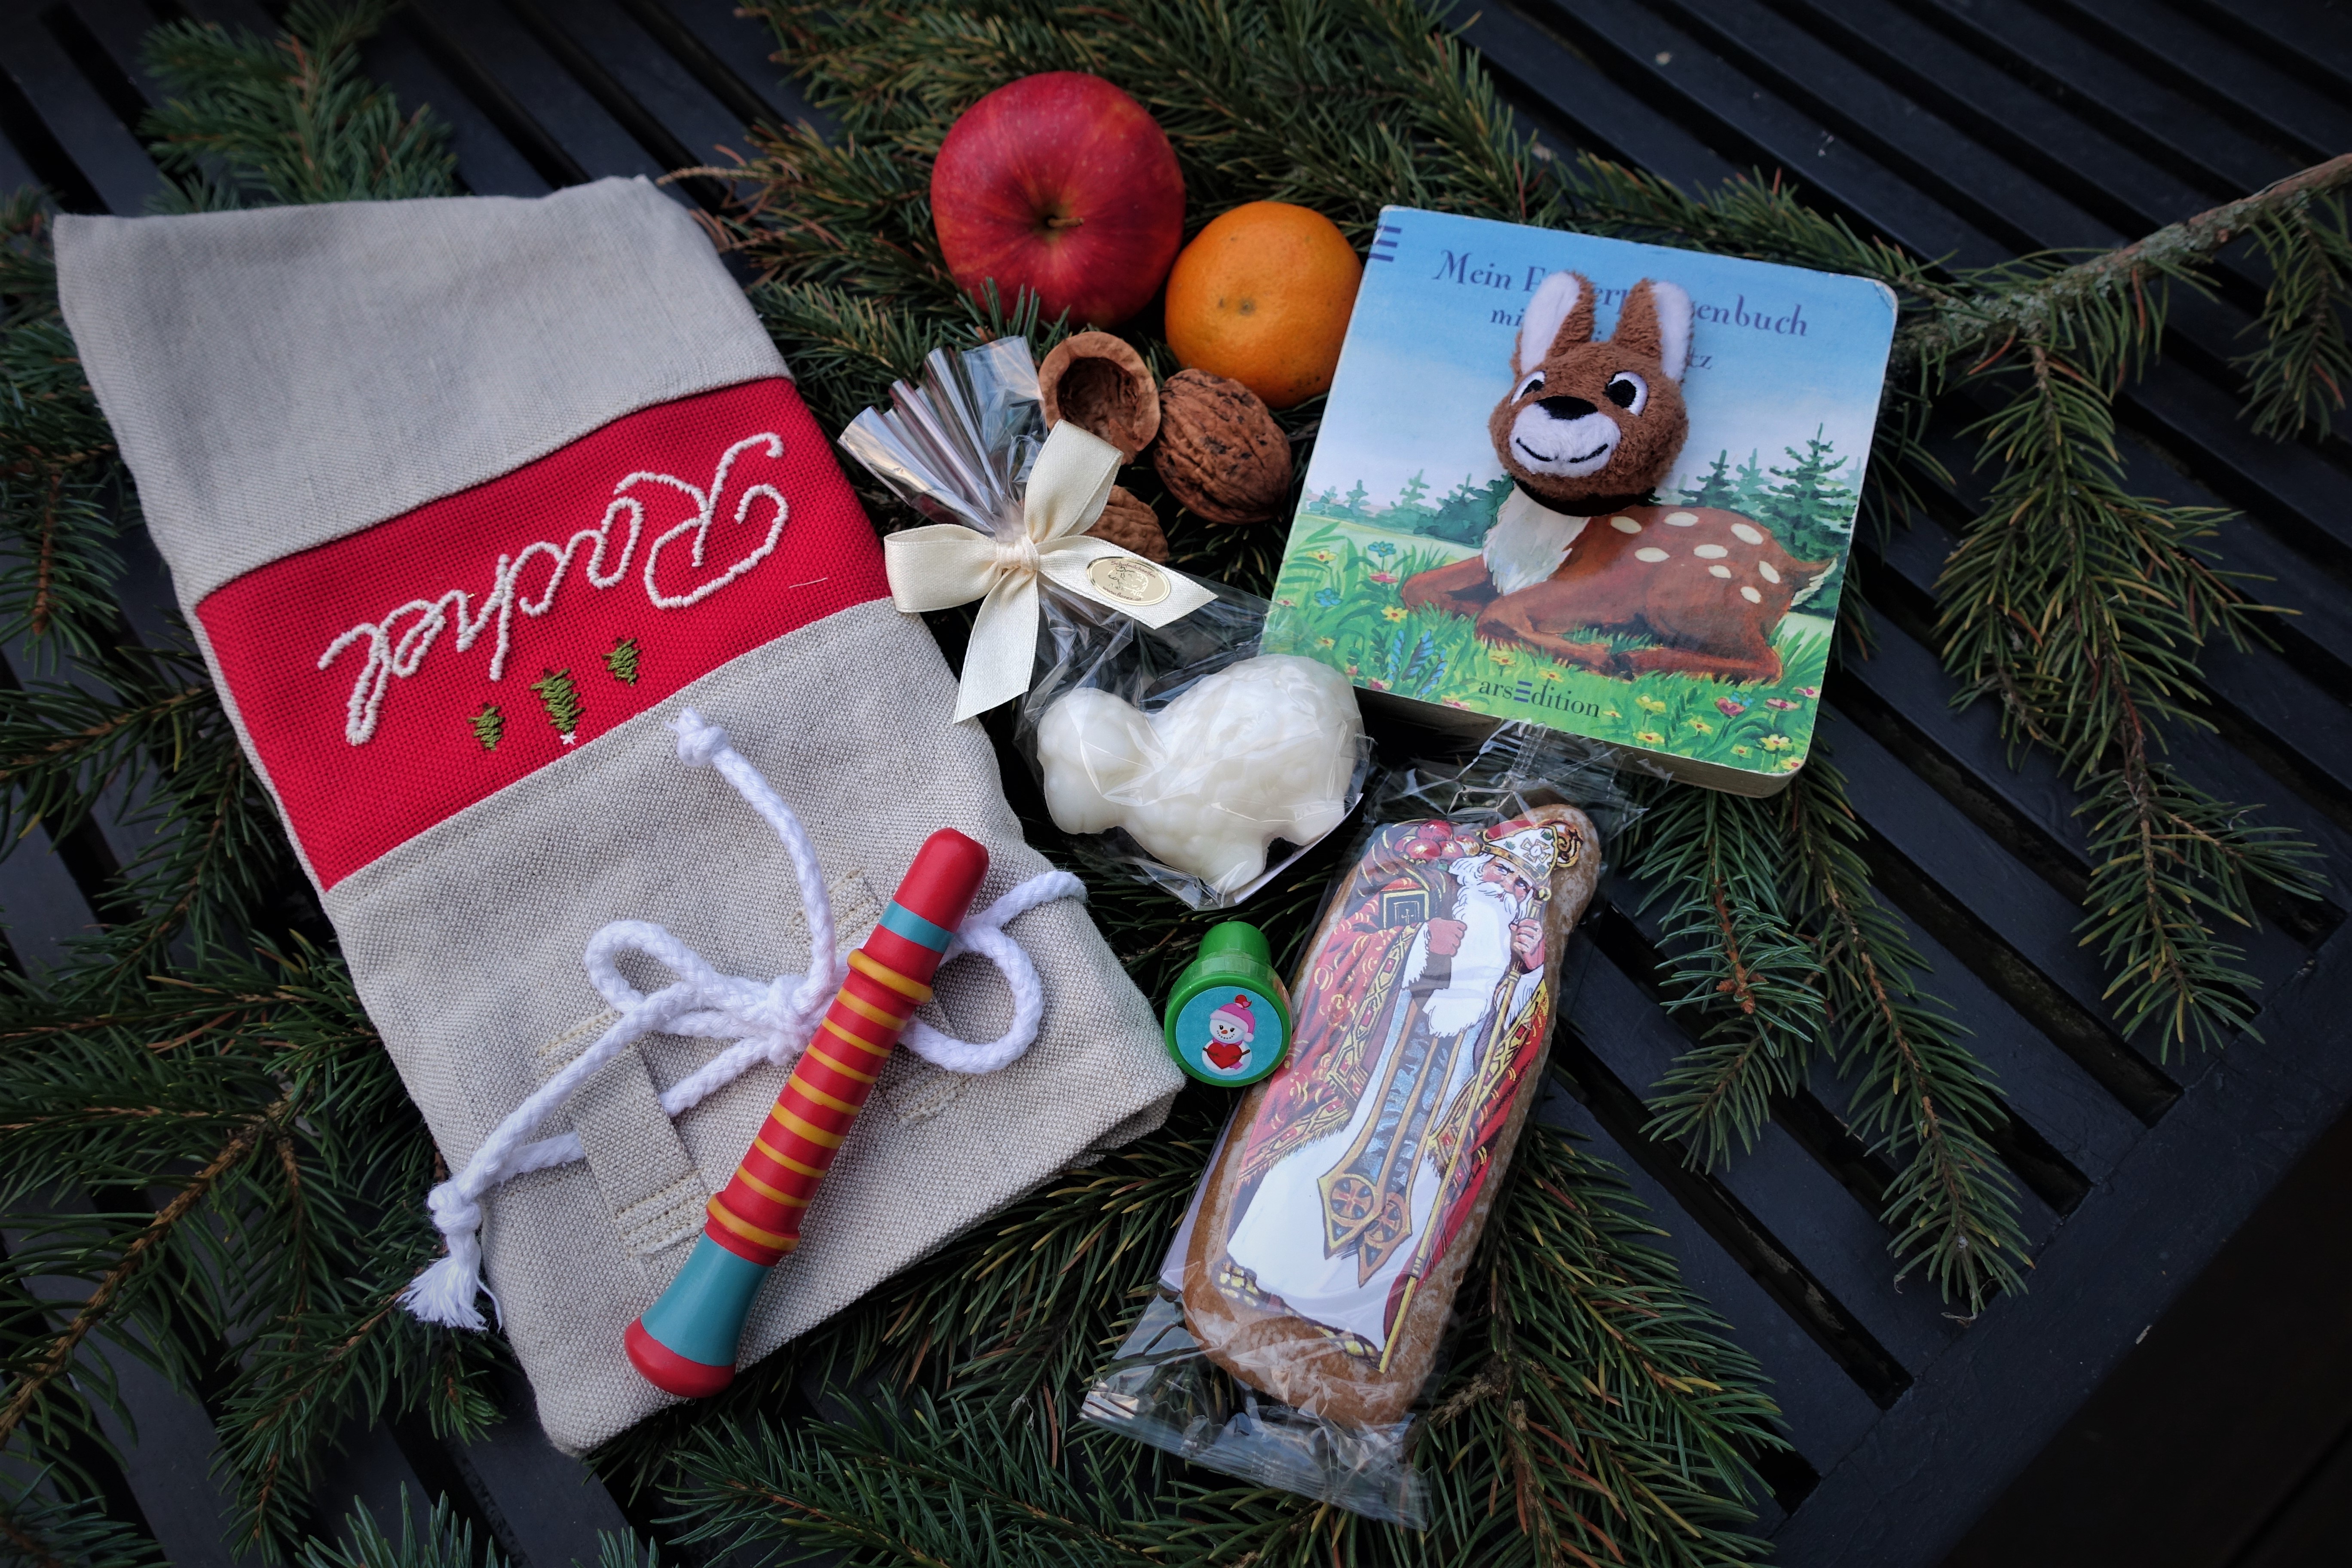 Ideas including ginger bread, stampers and a book, on how to fill the gift sack